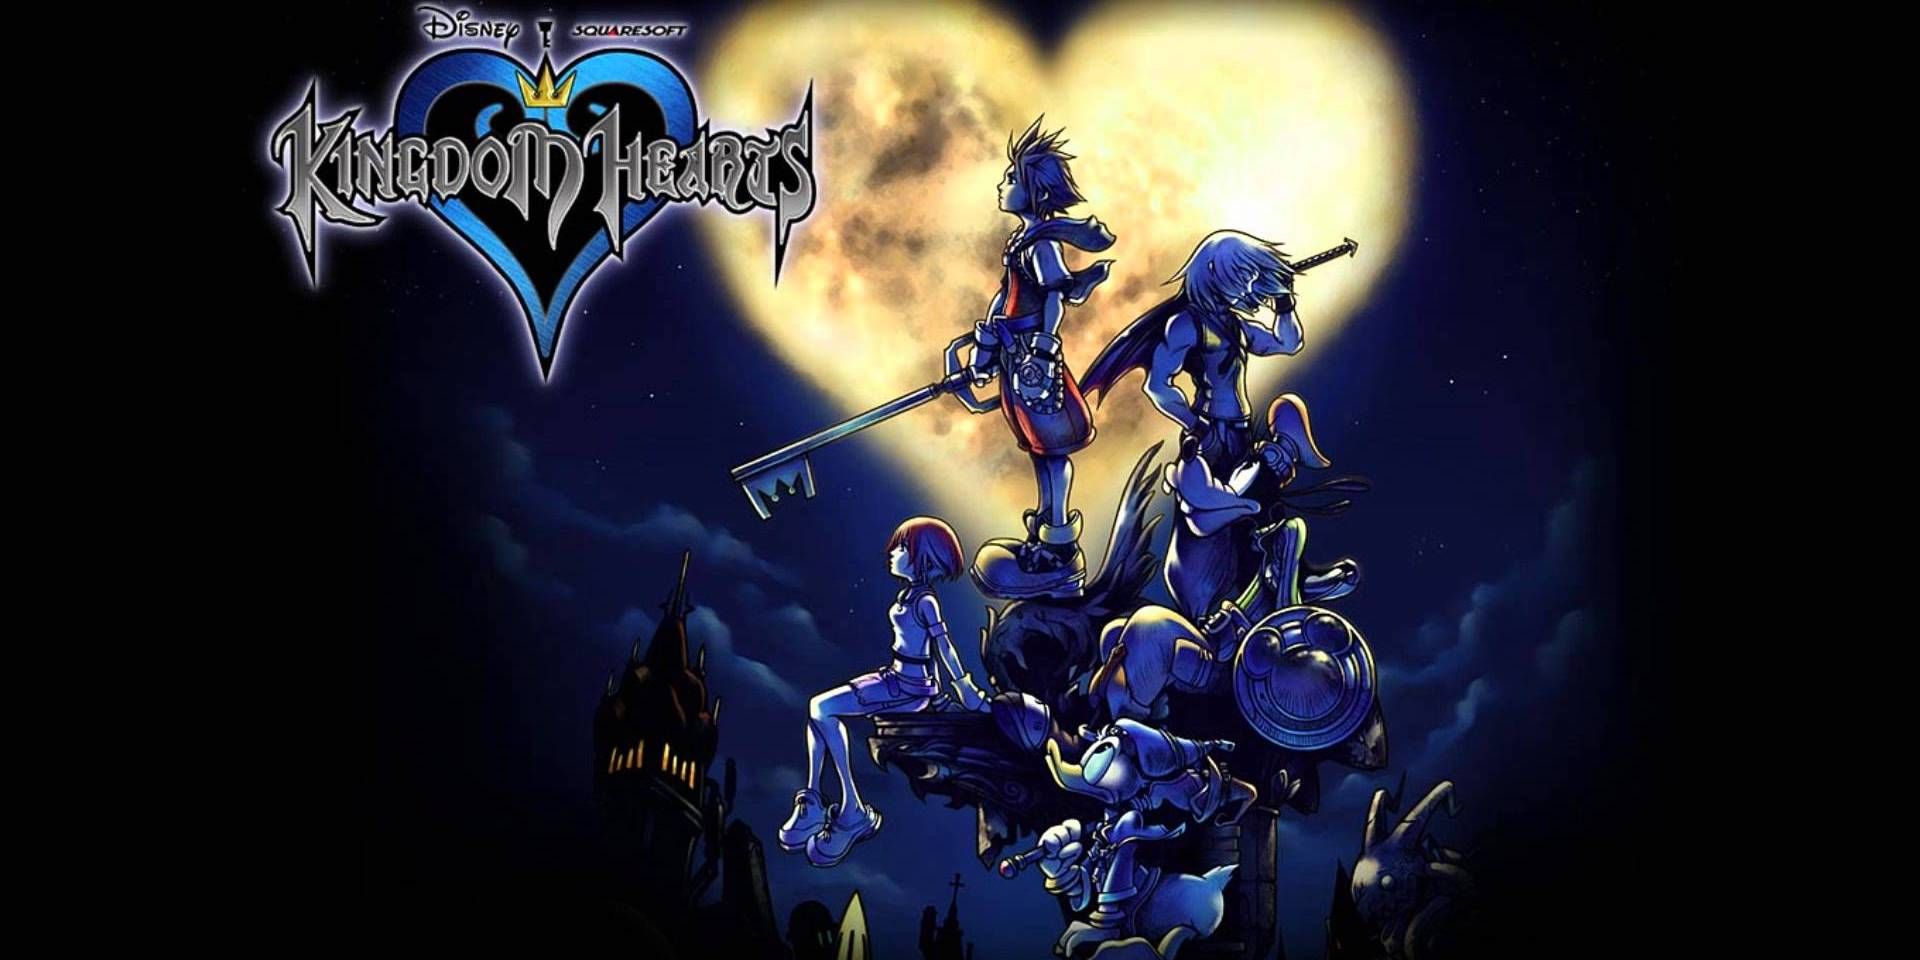 Cancelled Kingdom Hearts TV Show Pilot Animatic Released For First Time